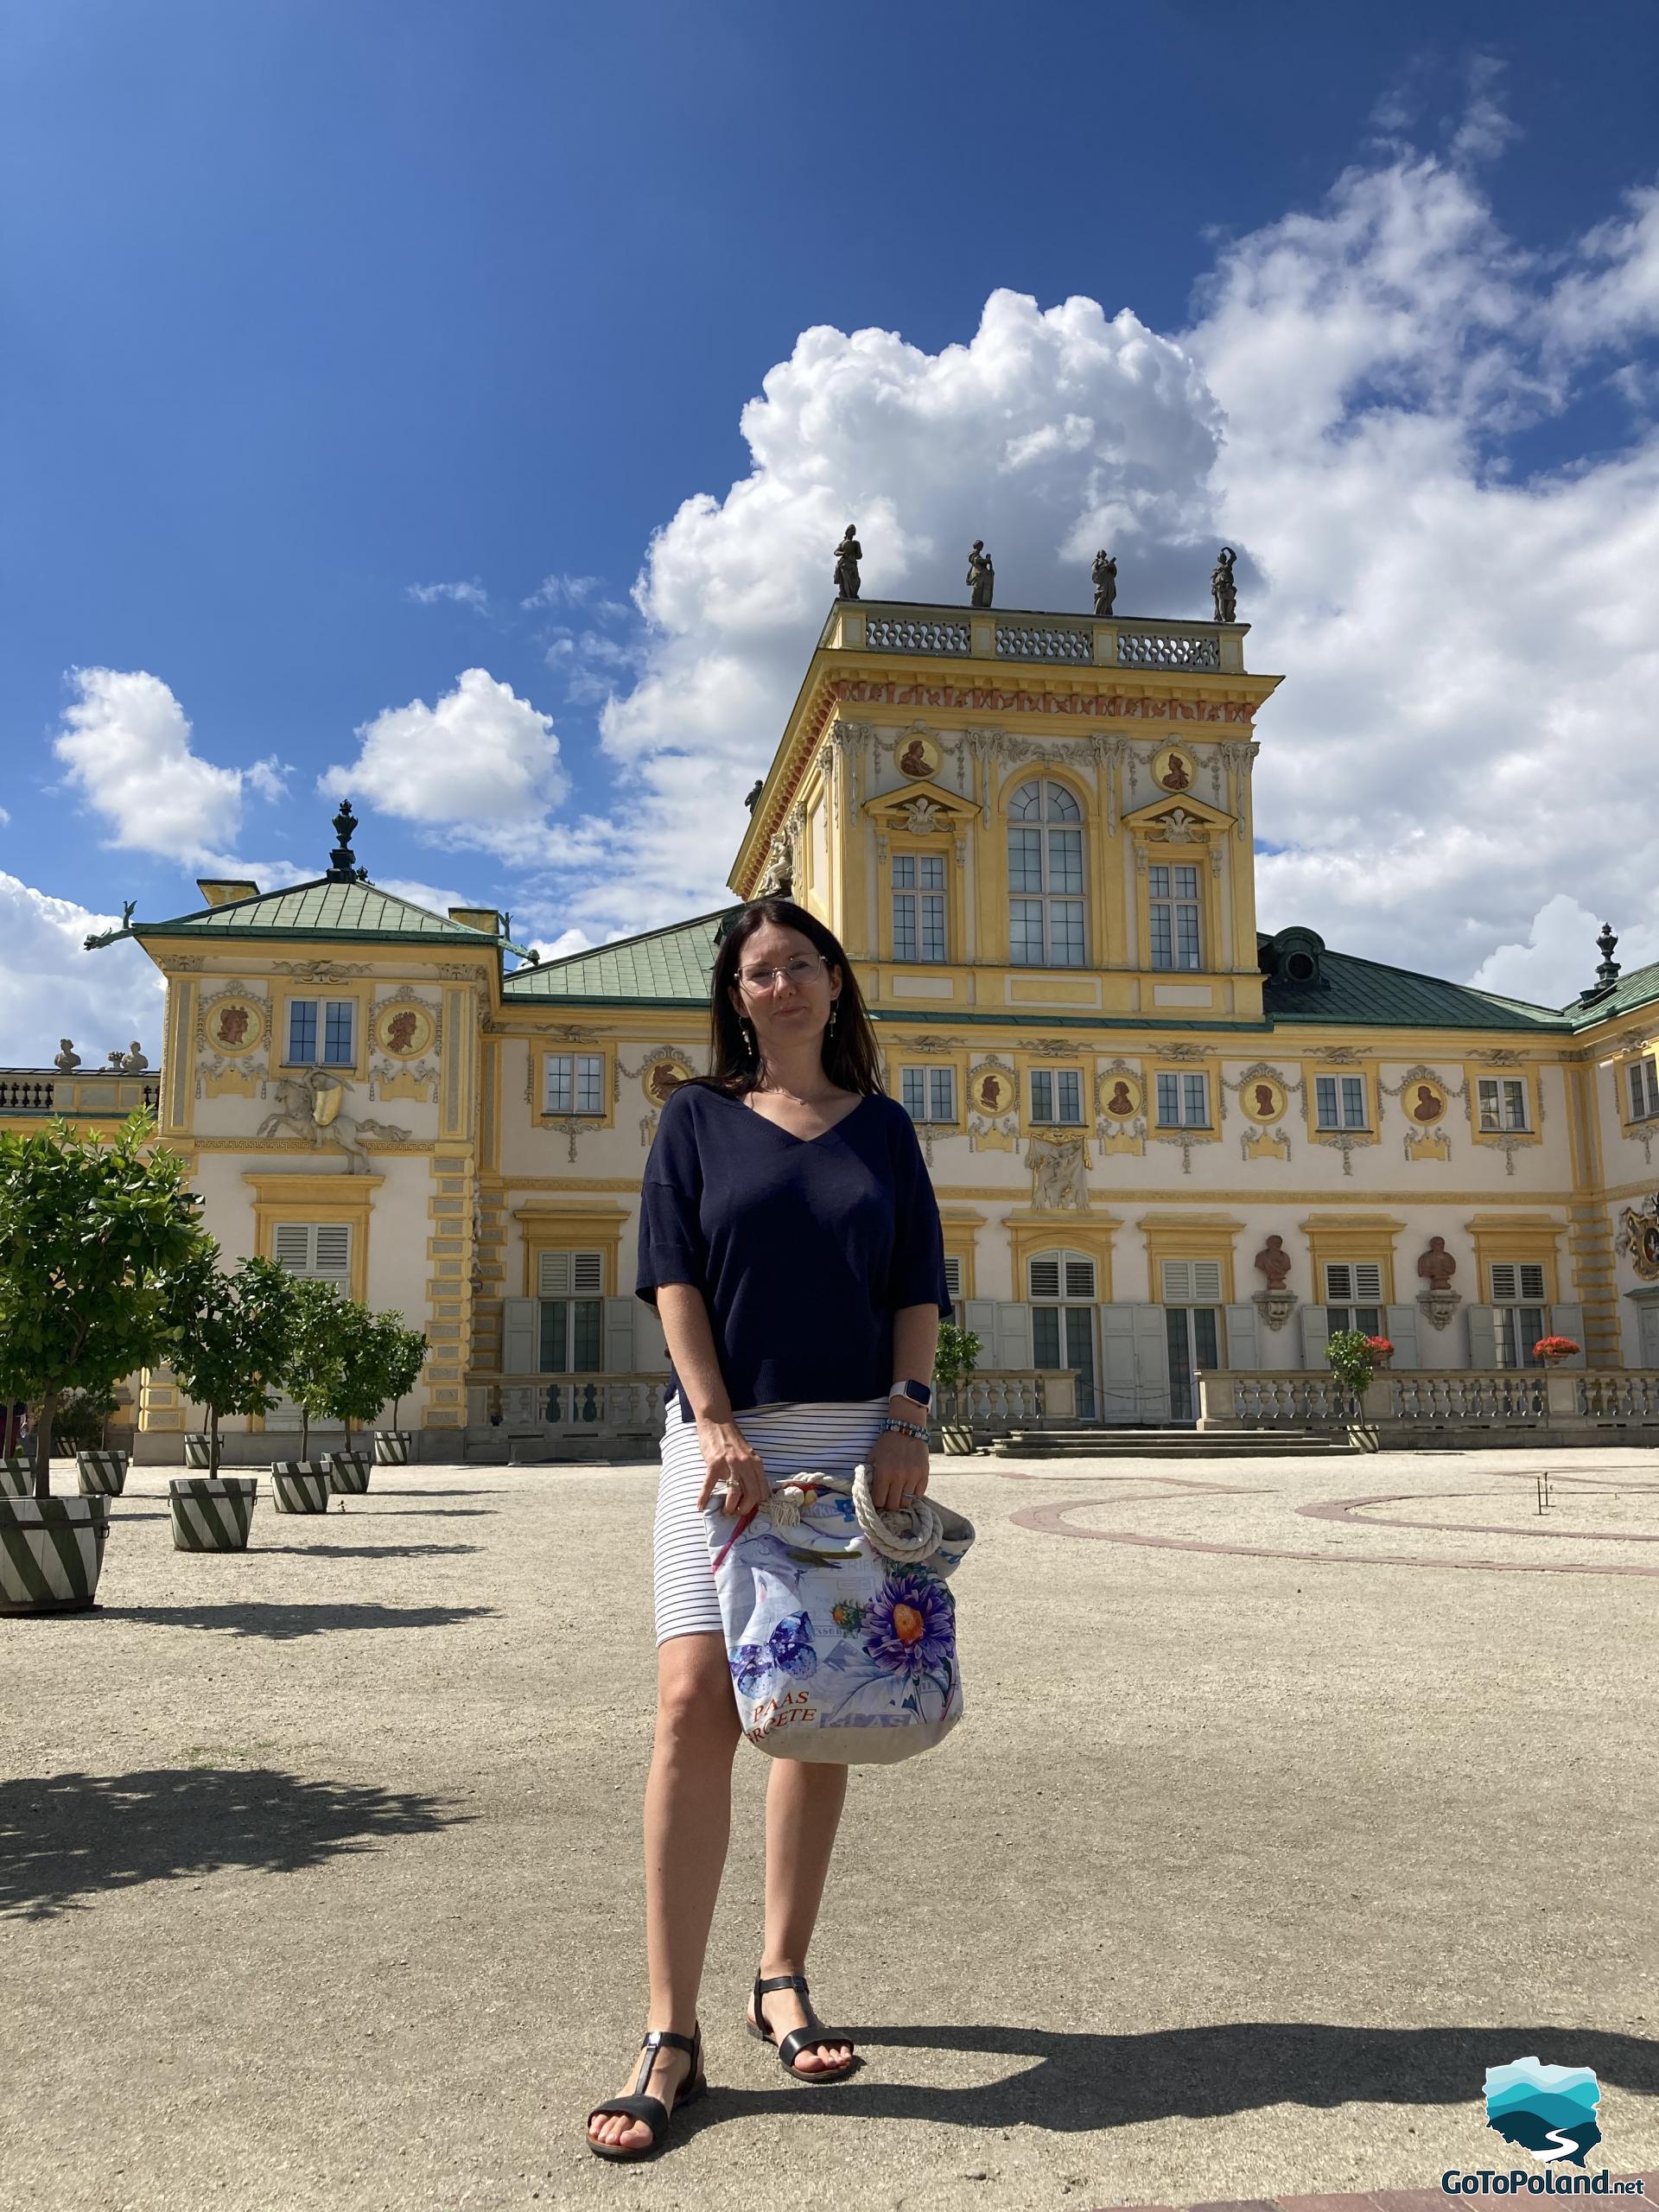 A woman in front of a yellow bulding in which is a palace